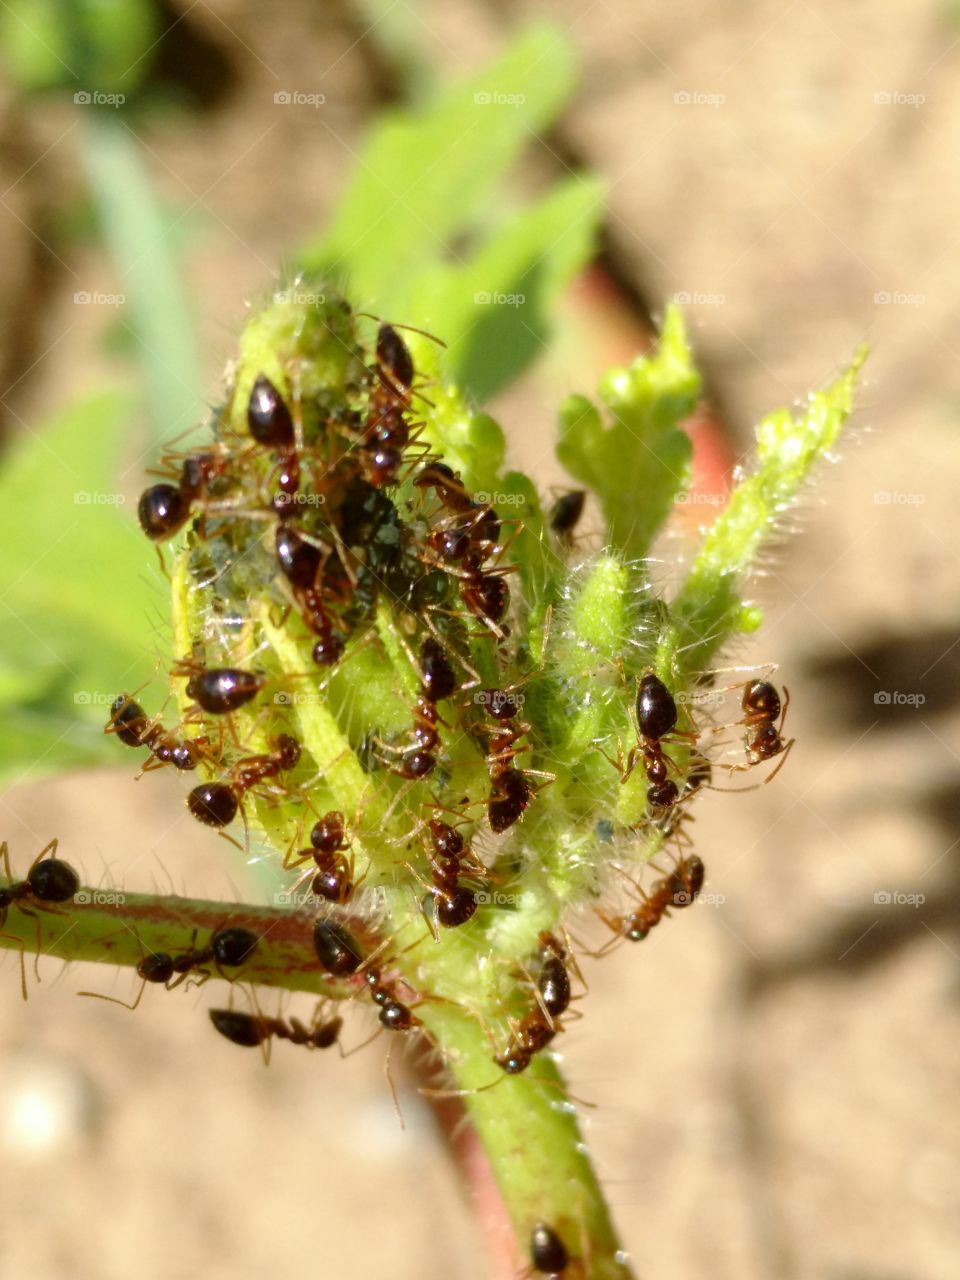 ants eating aphids off of an okra plant